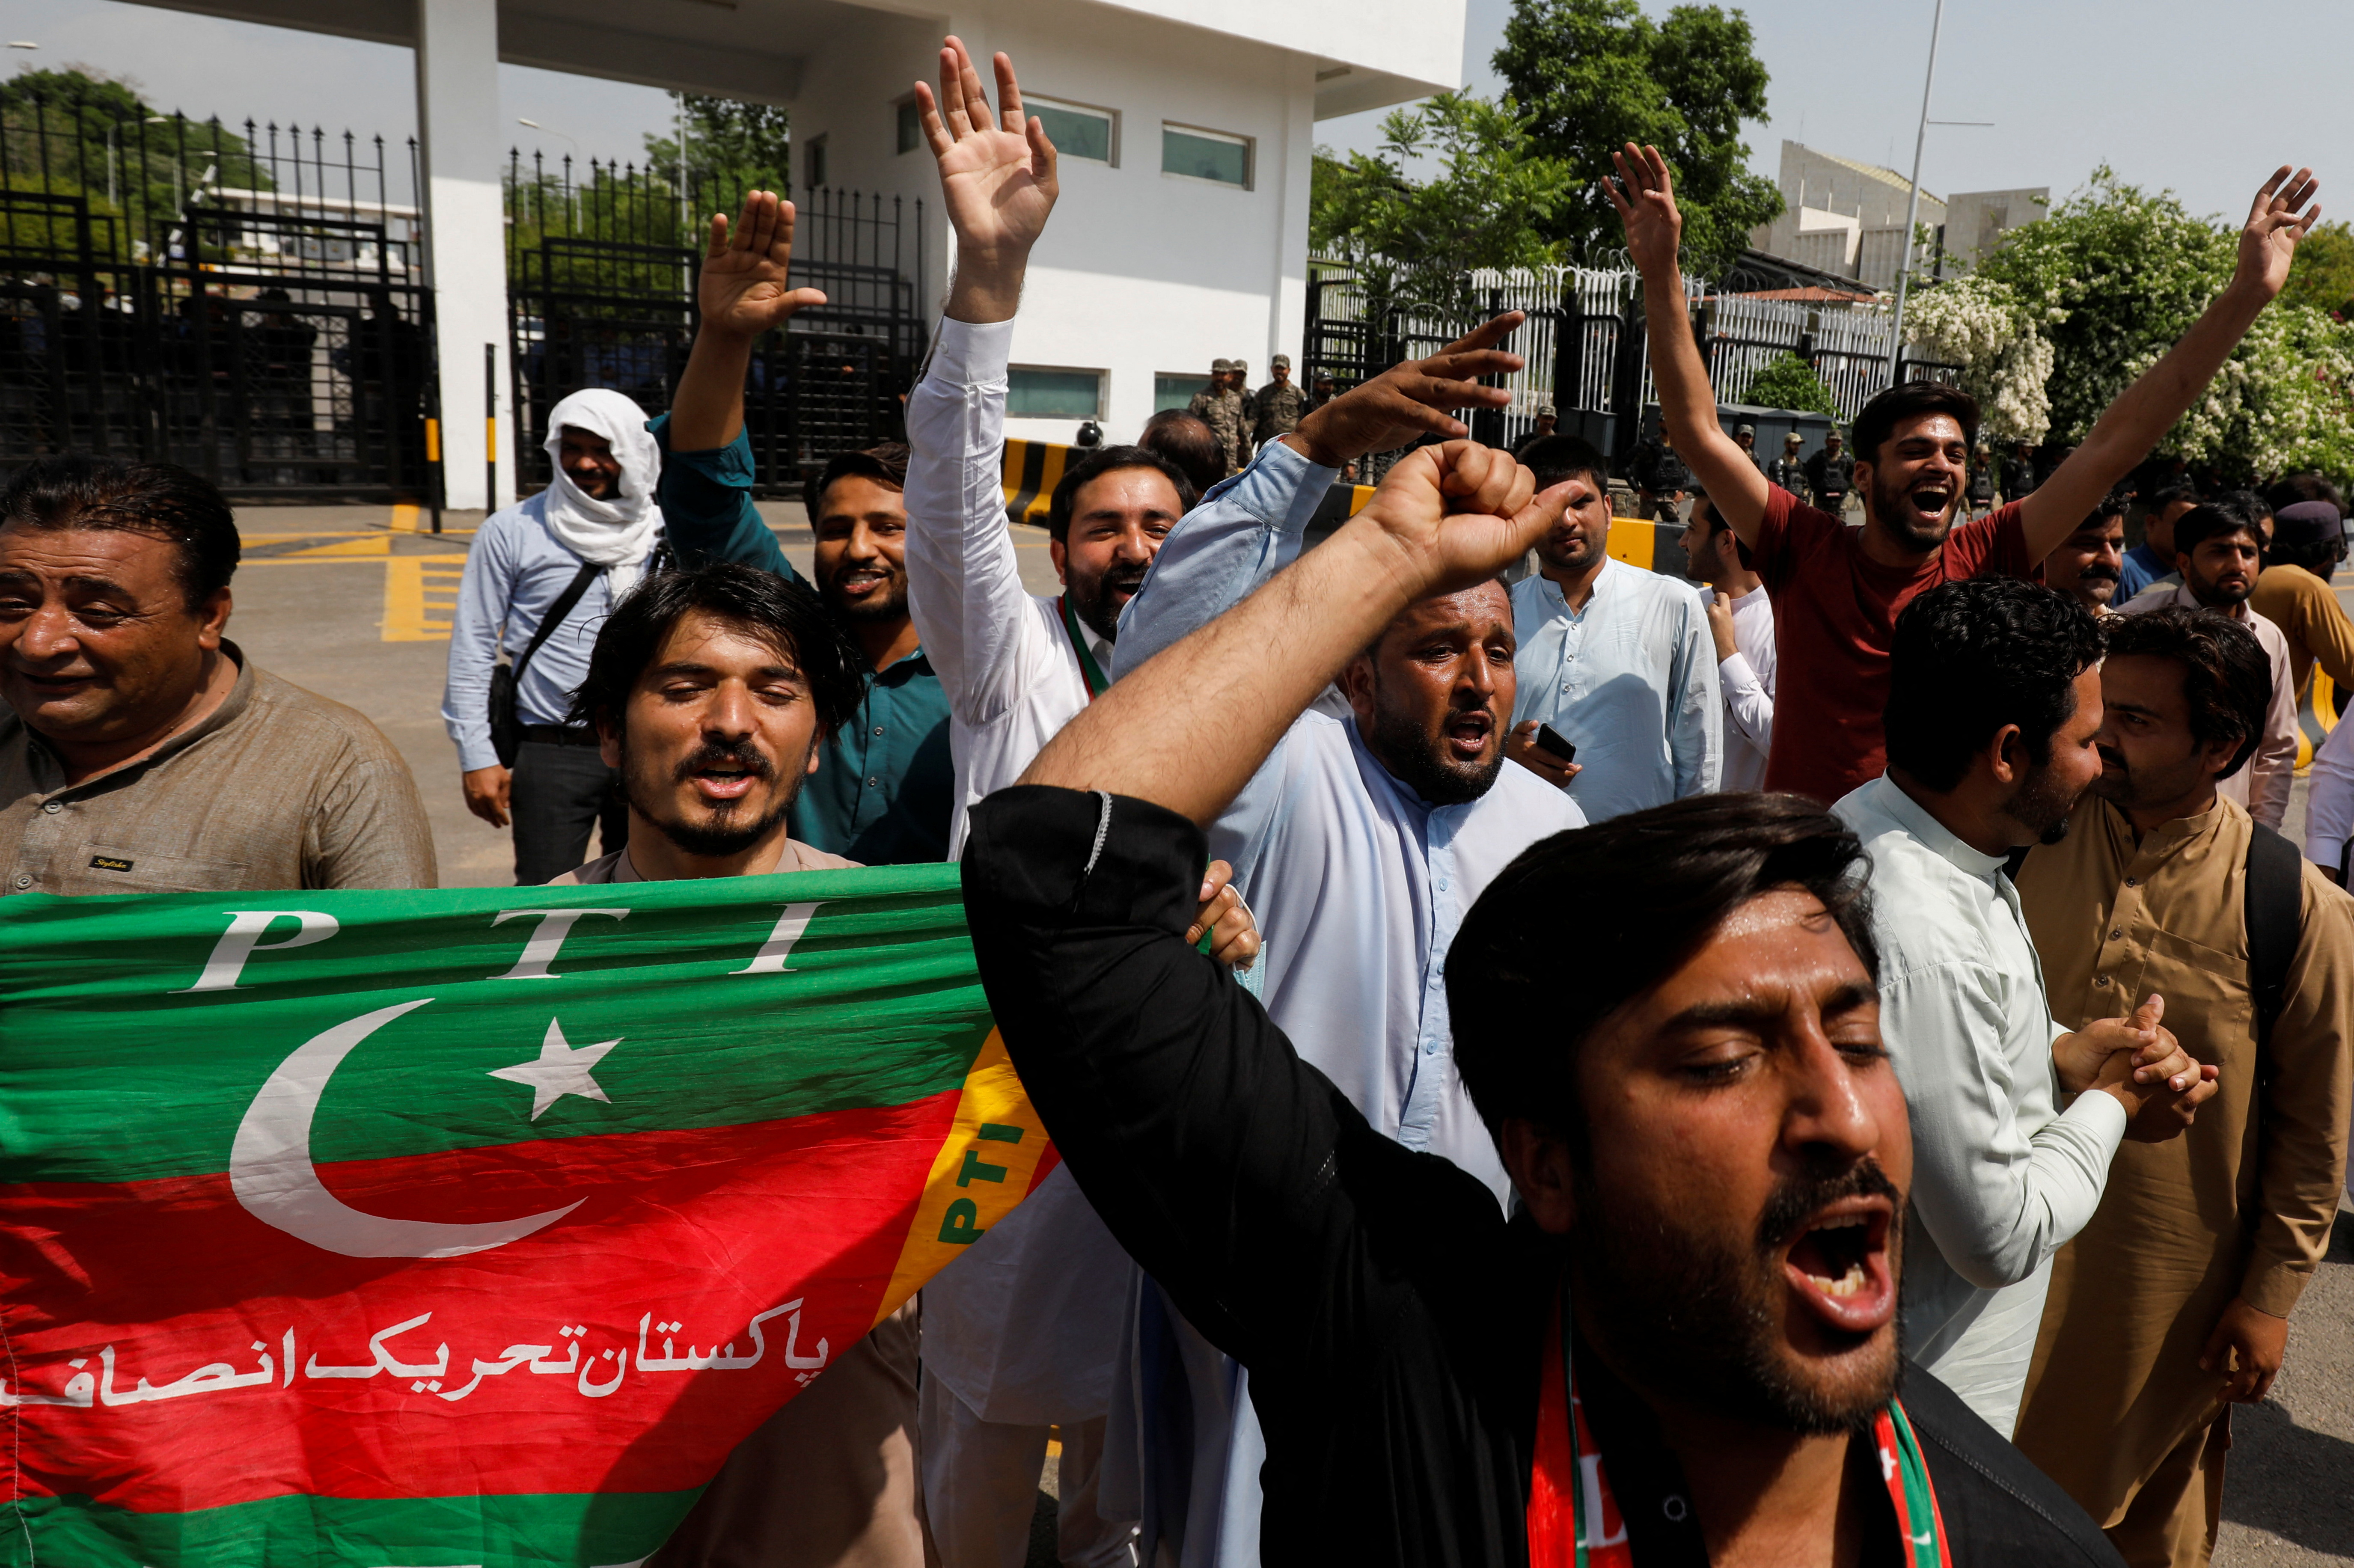 Supporters of the Pakistan Tehreek-e-Insaf (PTI) political party, chant slogans in support of Pakistani Prime Minister Imran Khan, outside parliament building Islamabad,